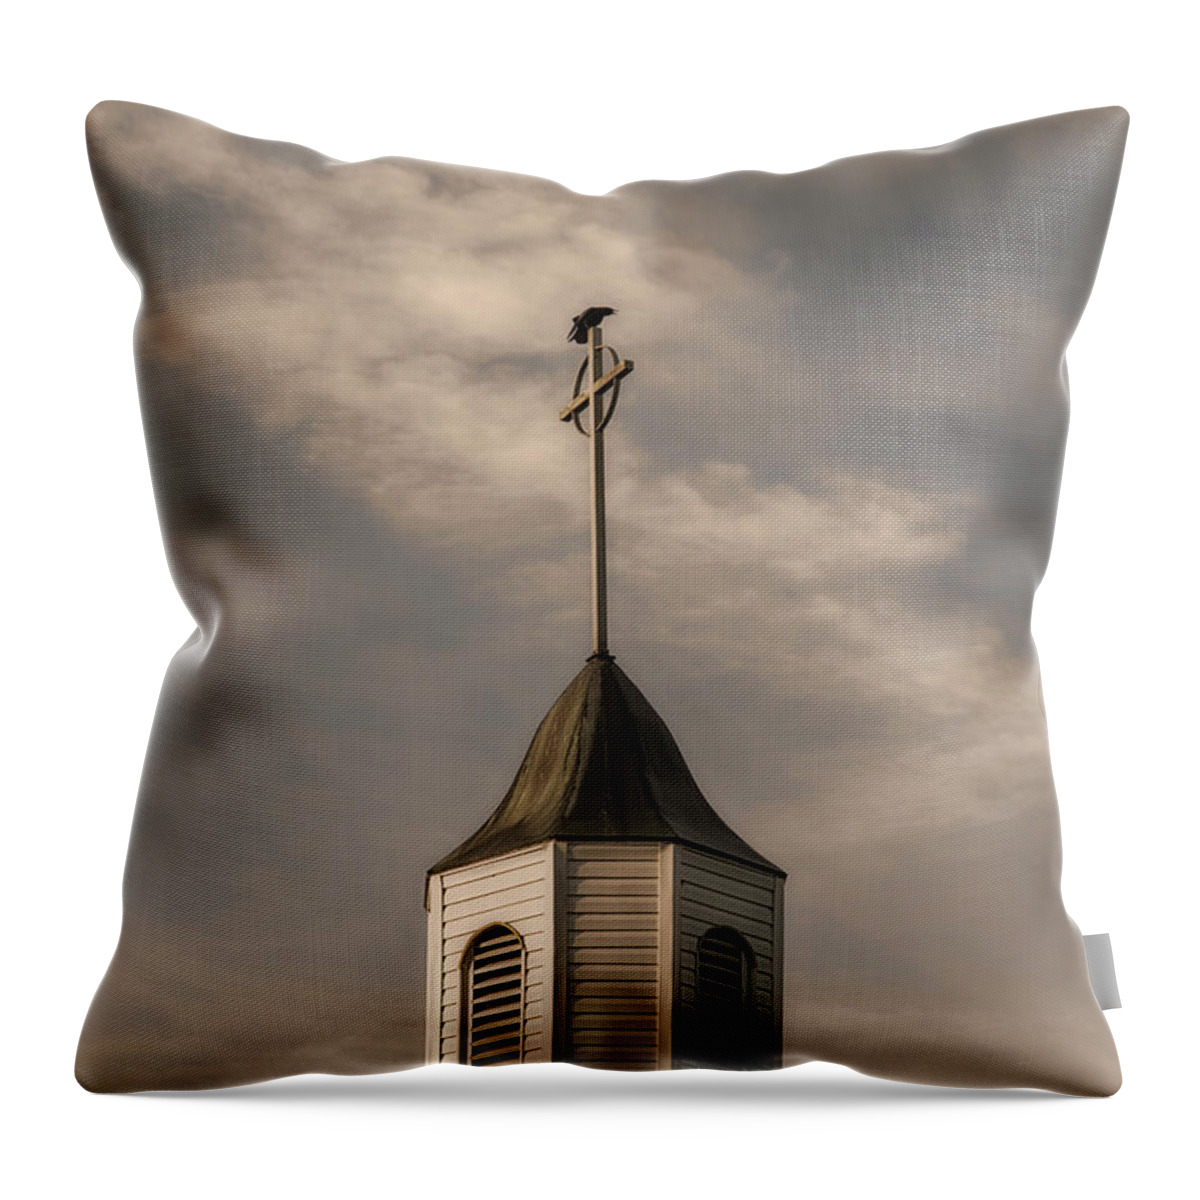 Birds Throw Pillow featuring the photograph Crow on Steeple by Richard Rizzo